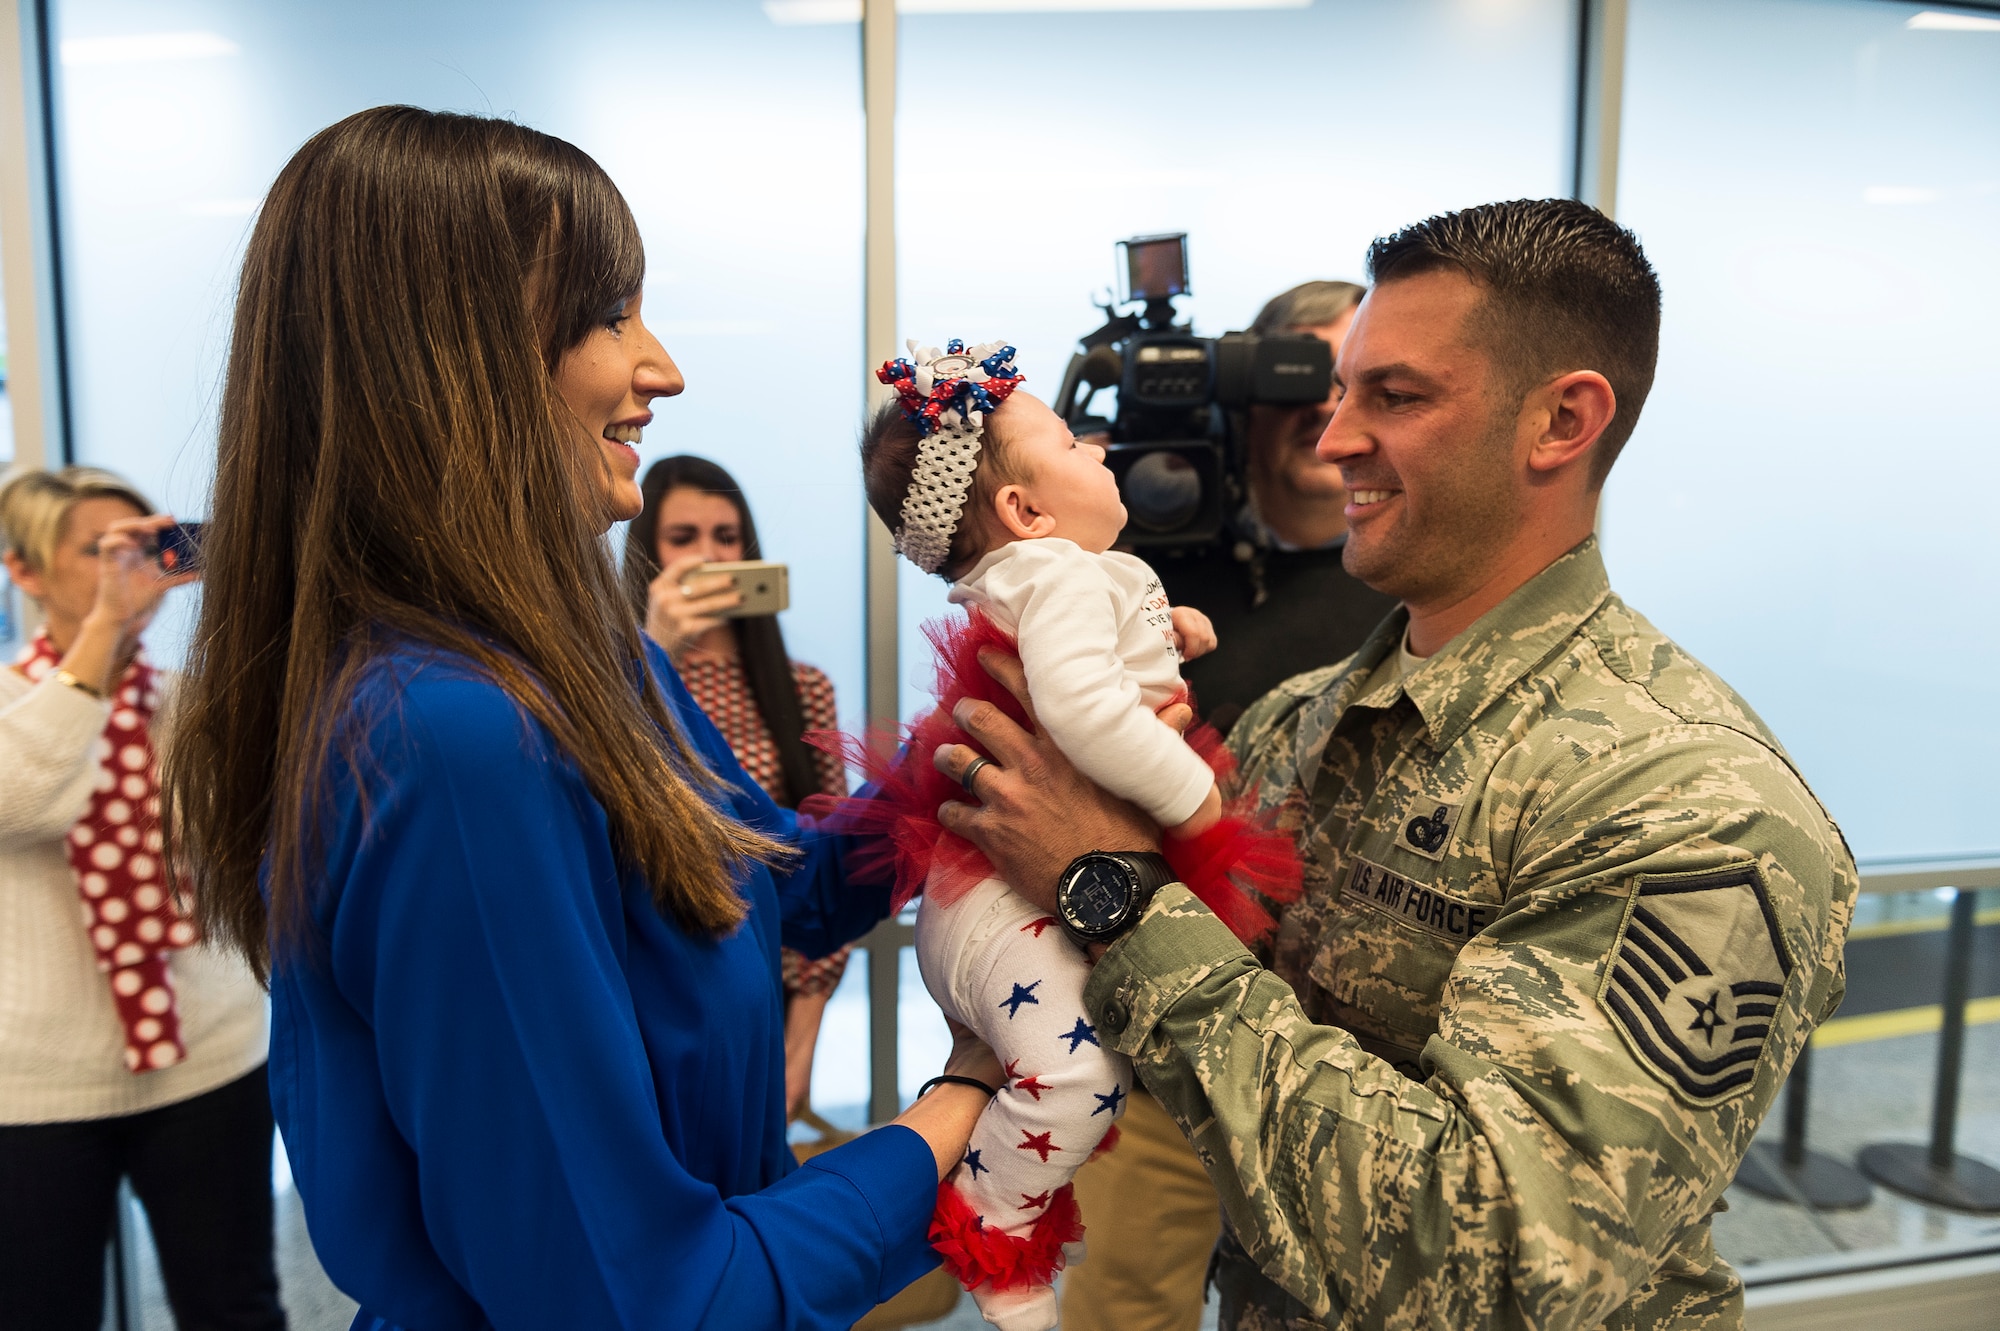 Master Sgt. Daniel Owczarczak, an Airman assigned to the 107th Security Forces Squadron, Niagara Falls Air Reserve Station, N.Y., gets to see his newborn daughter for the first time. Owczarczak was one of more than 30 Airmen from the 107th SFS to return from a six-month deployment to Southwest Asia, Feb. 4-5, 2016. (U.S. Air National Guard photo by Staff Sgt. Ryan Campbell/Released)